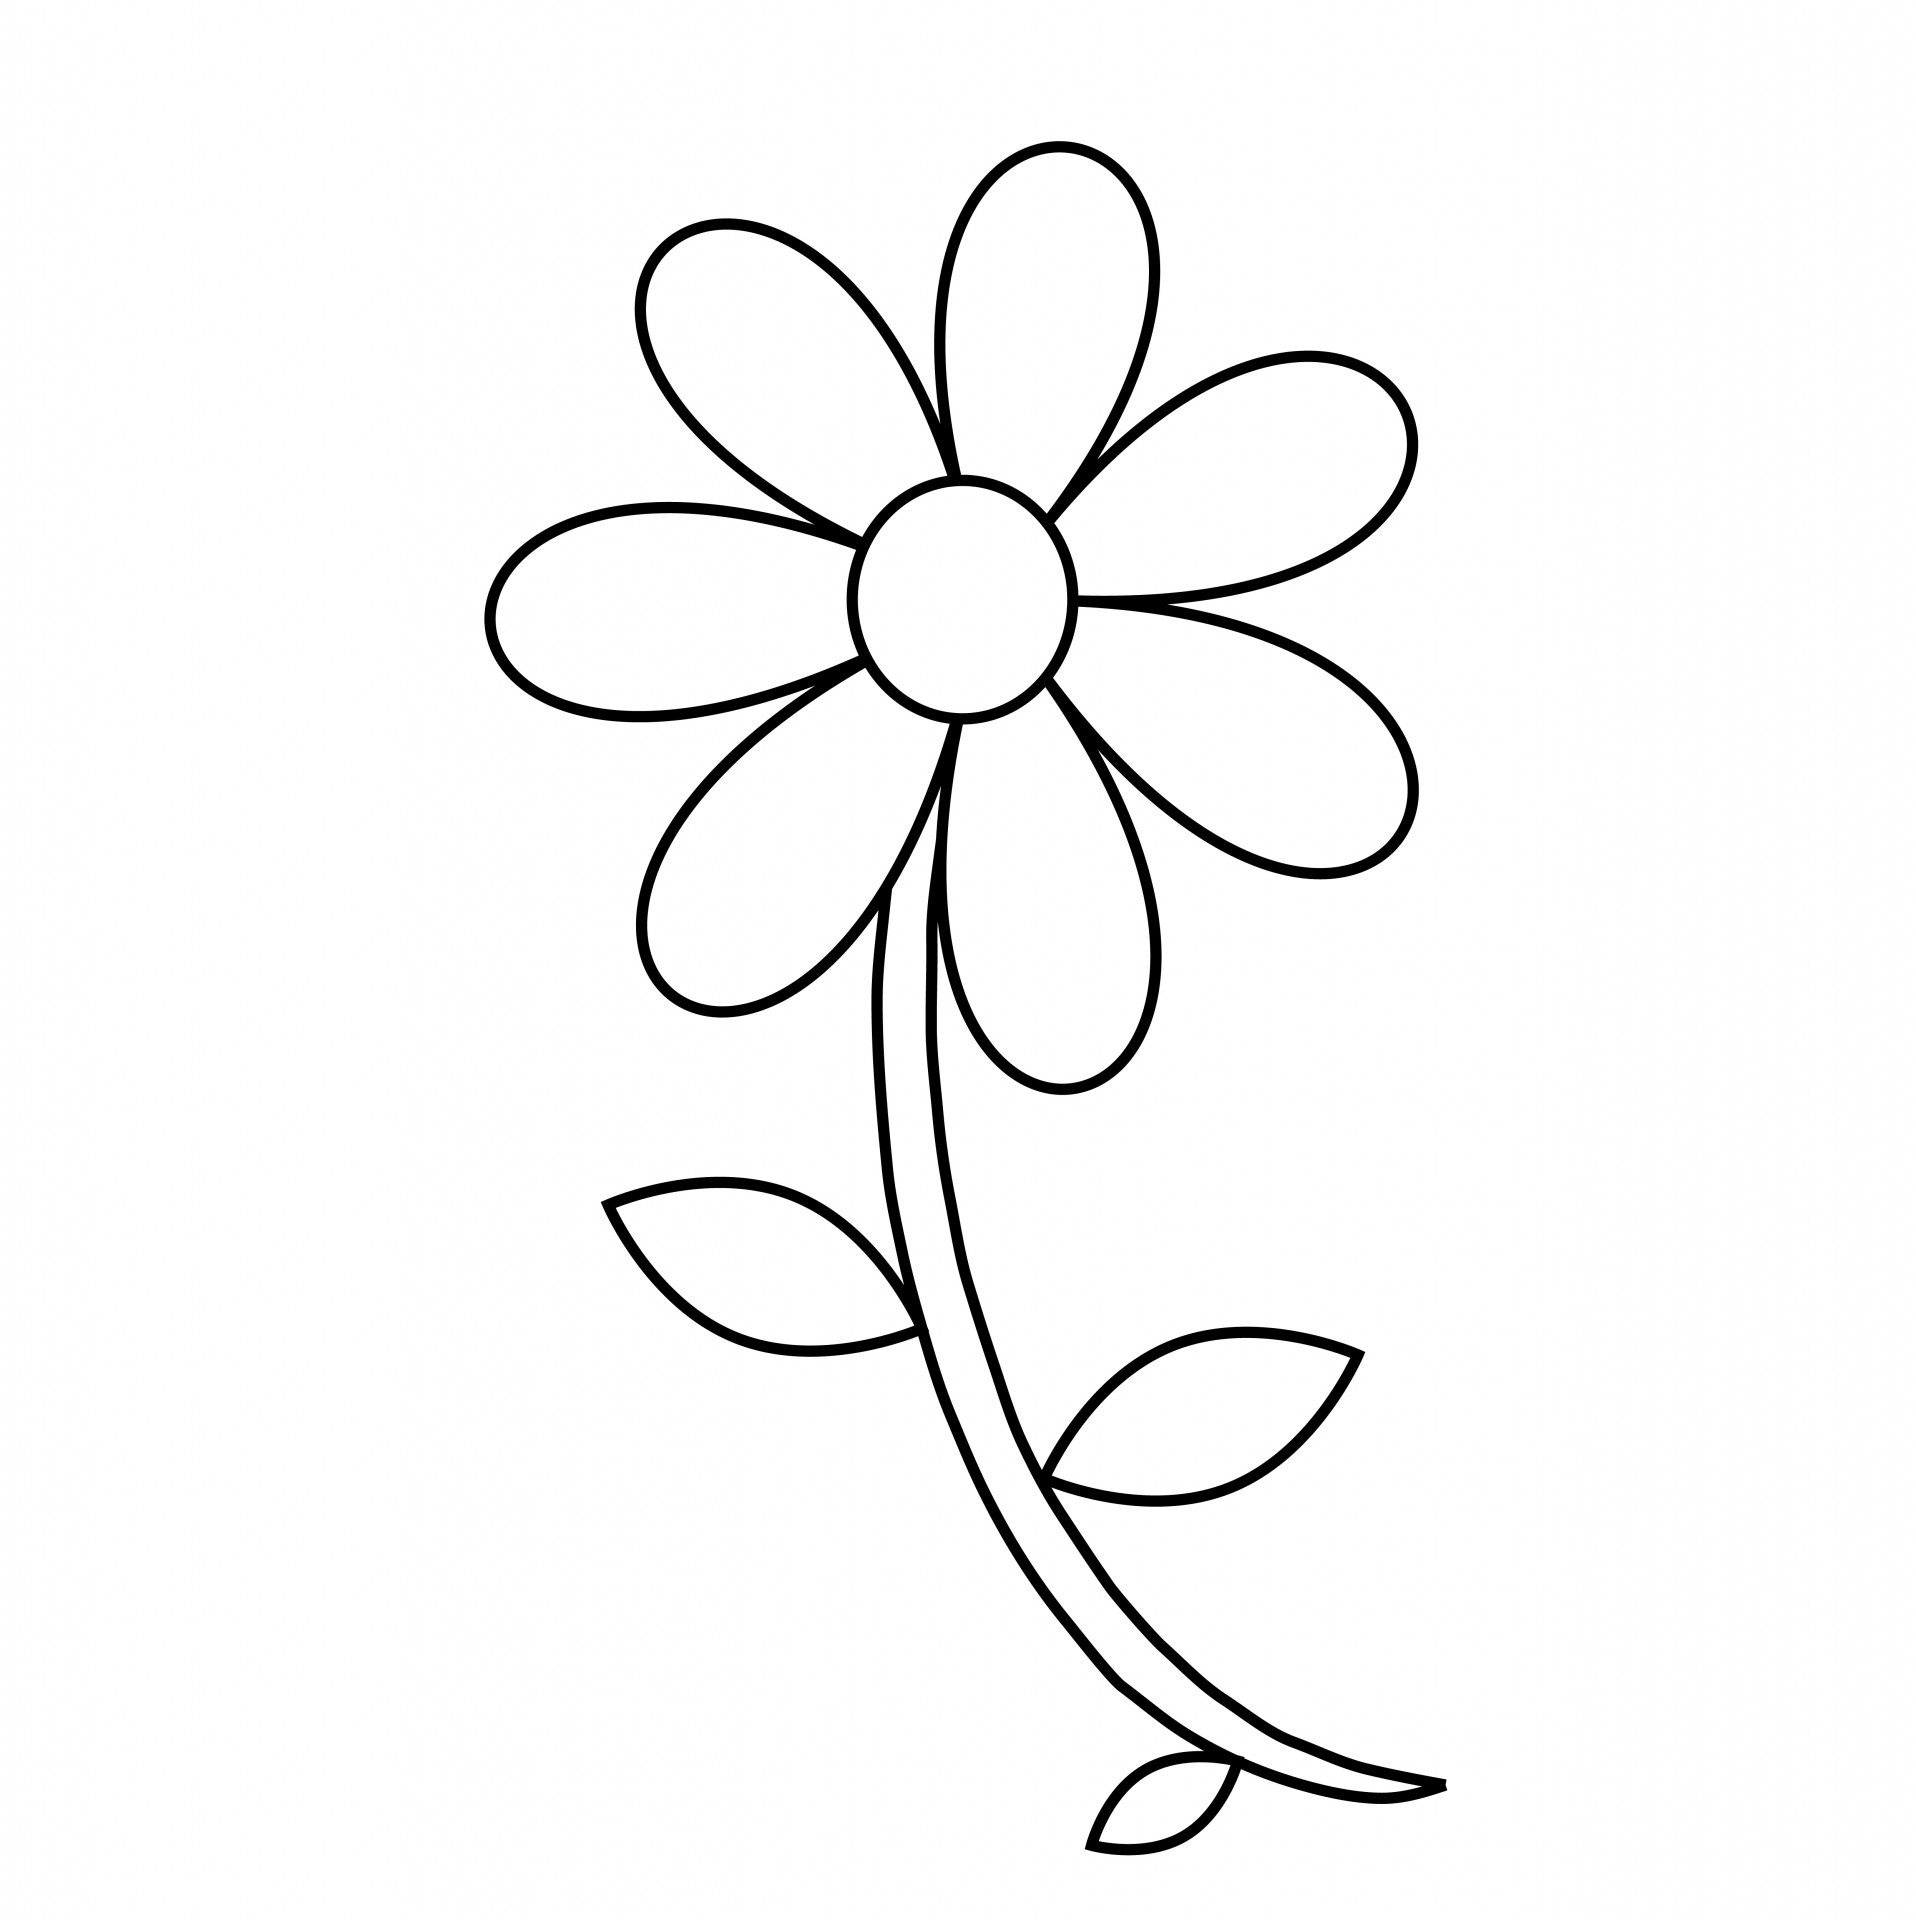 flower outline coloring page id 11951 : Uncategorized - yoand.